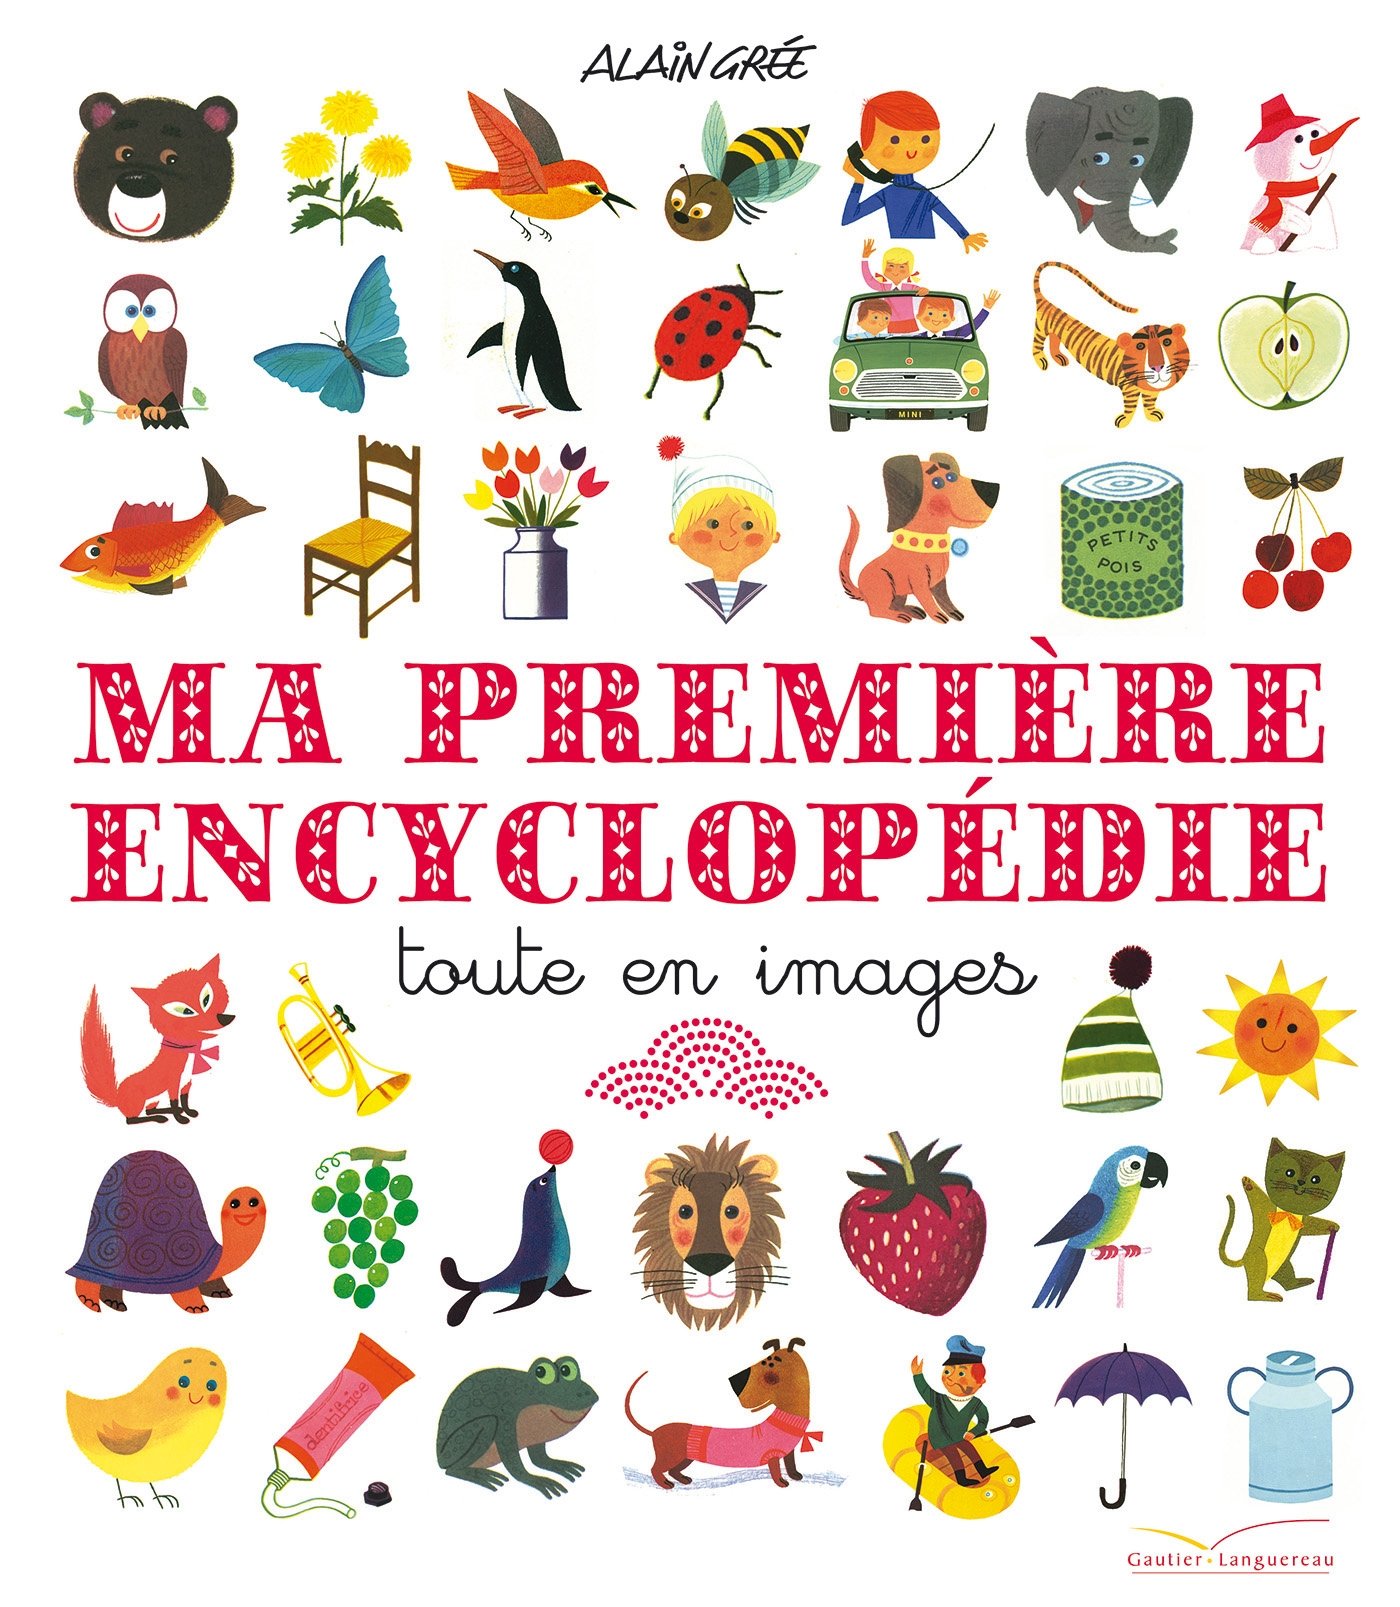 Alain Gree Book in France